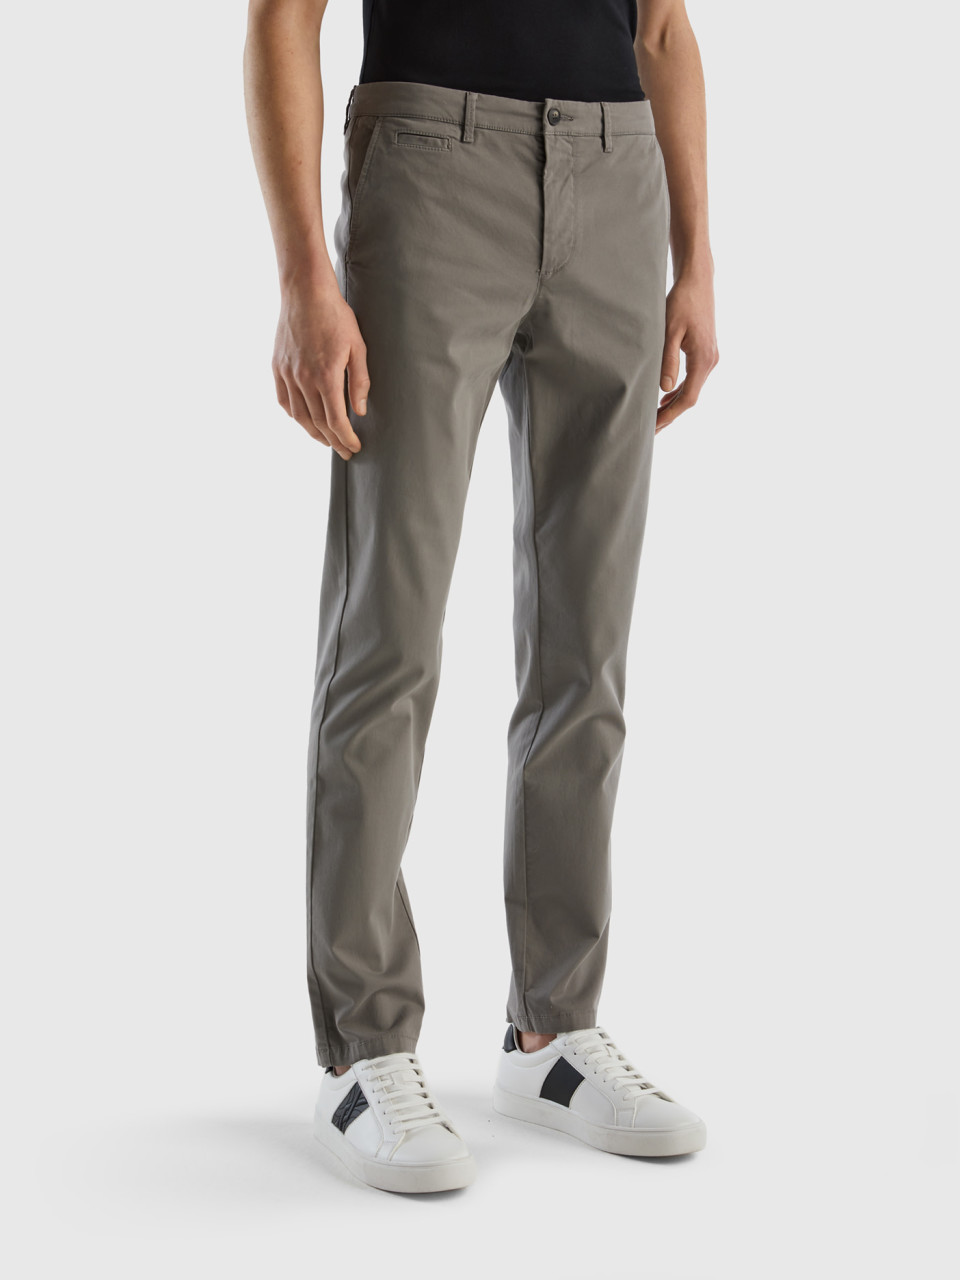 Benetton, Chino Coupe Slim Gris, Gris, Homme